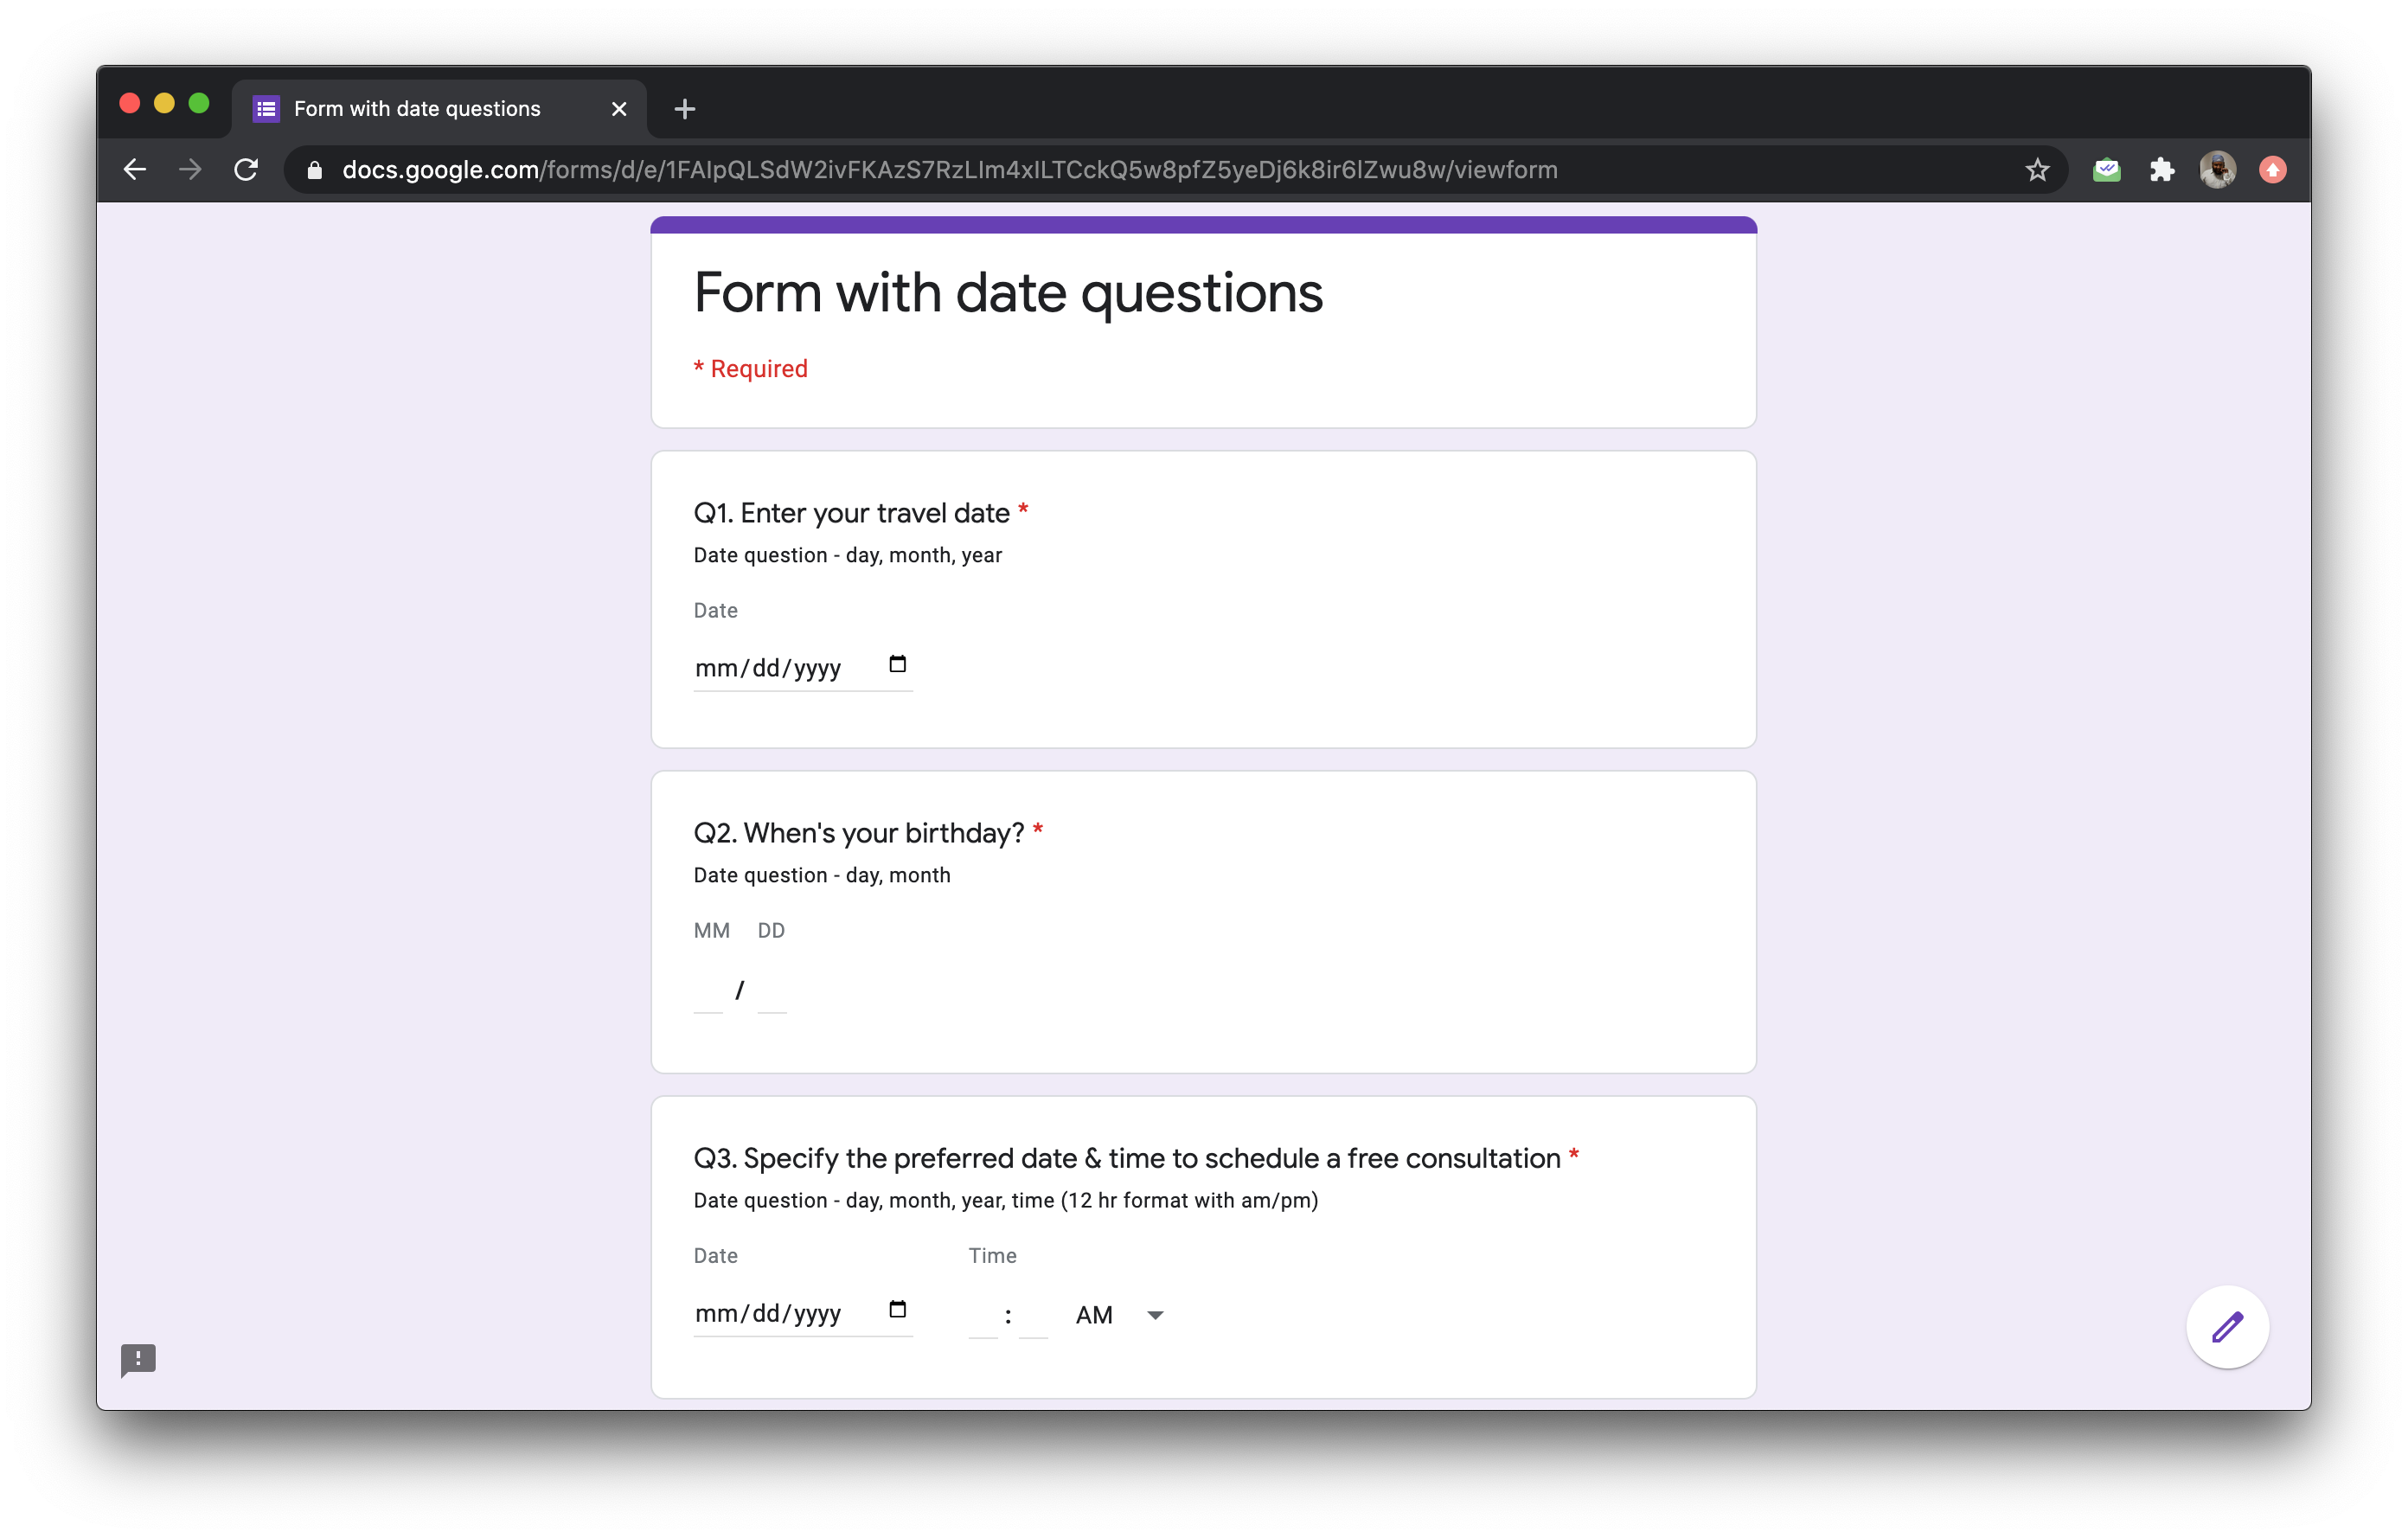 Date question allows users to fill any date. You can customize this question to collect just the day and month, or include optional year and time. 